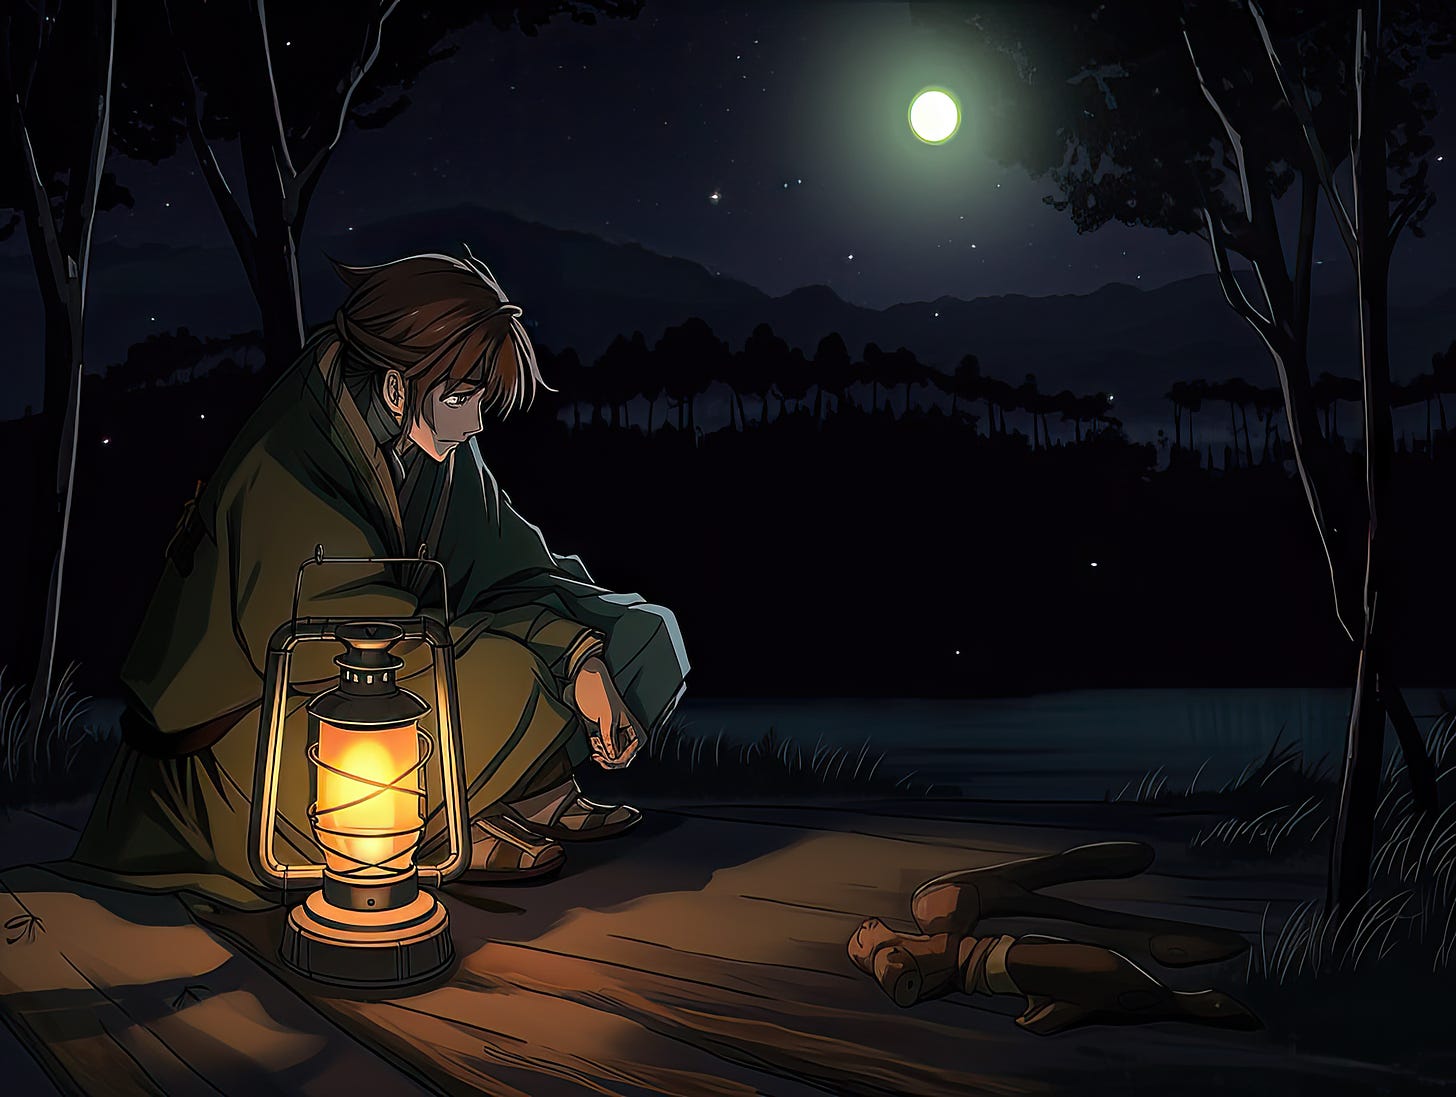 A man sitting by himself in the wilderness, at night, surrounded by darkness, with a small lantern providing light that comforts him